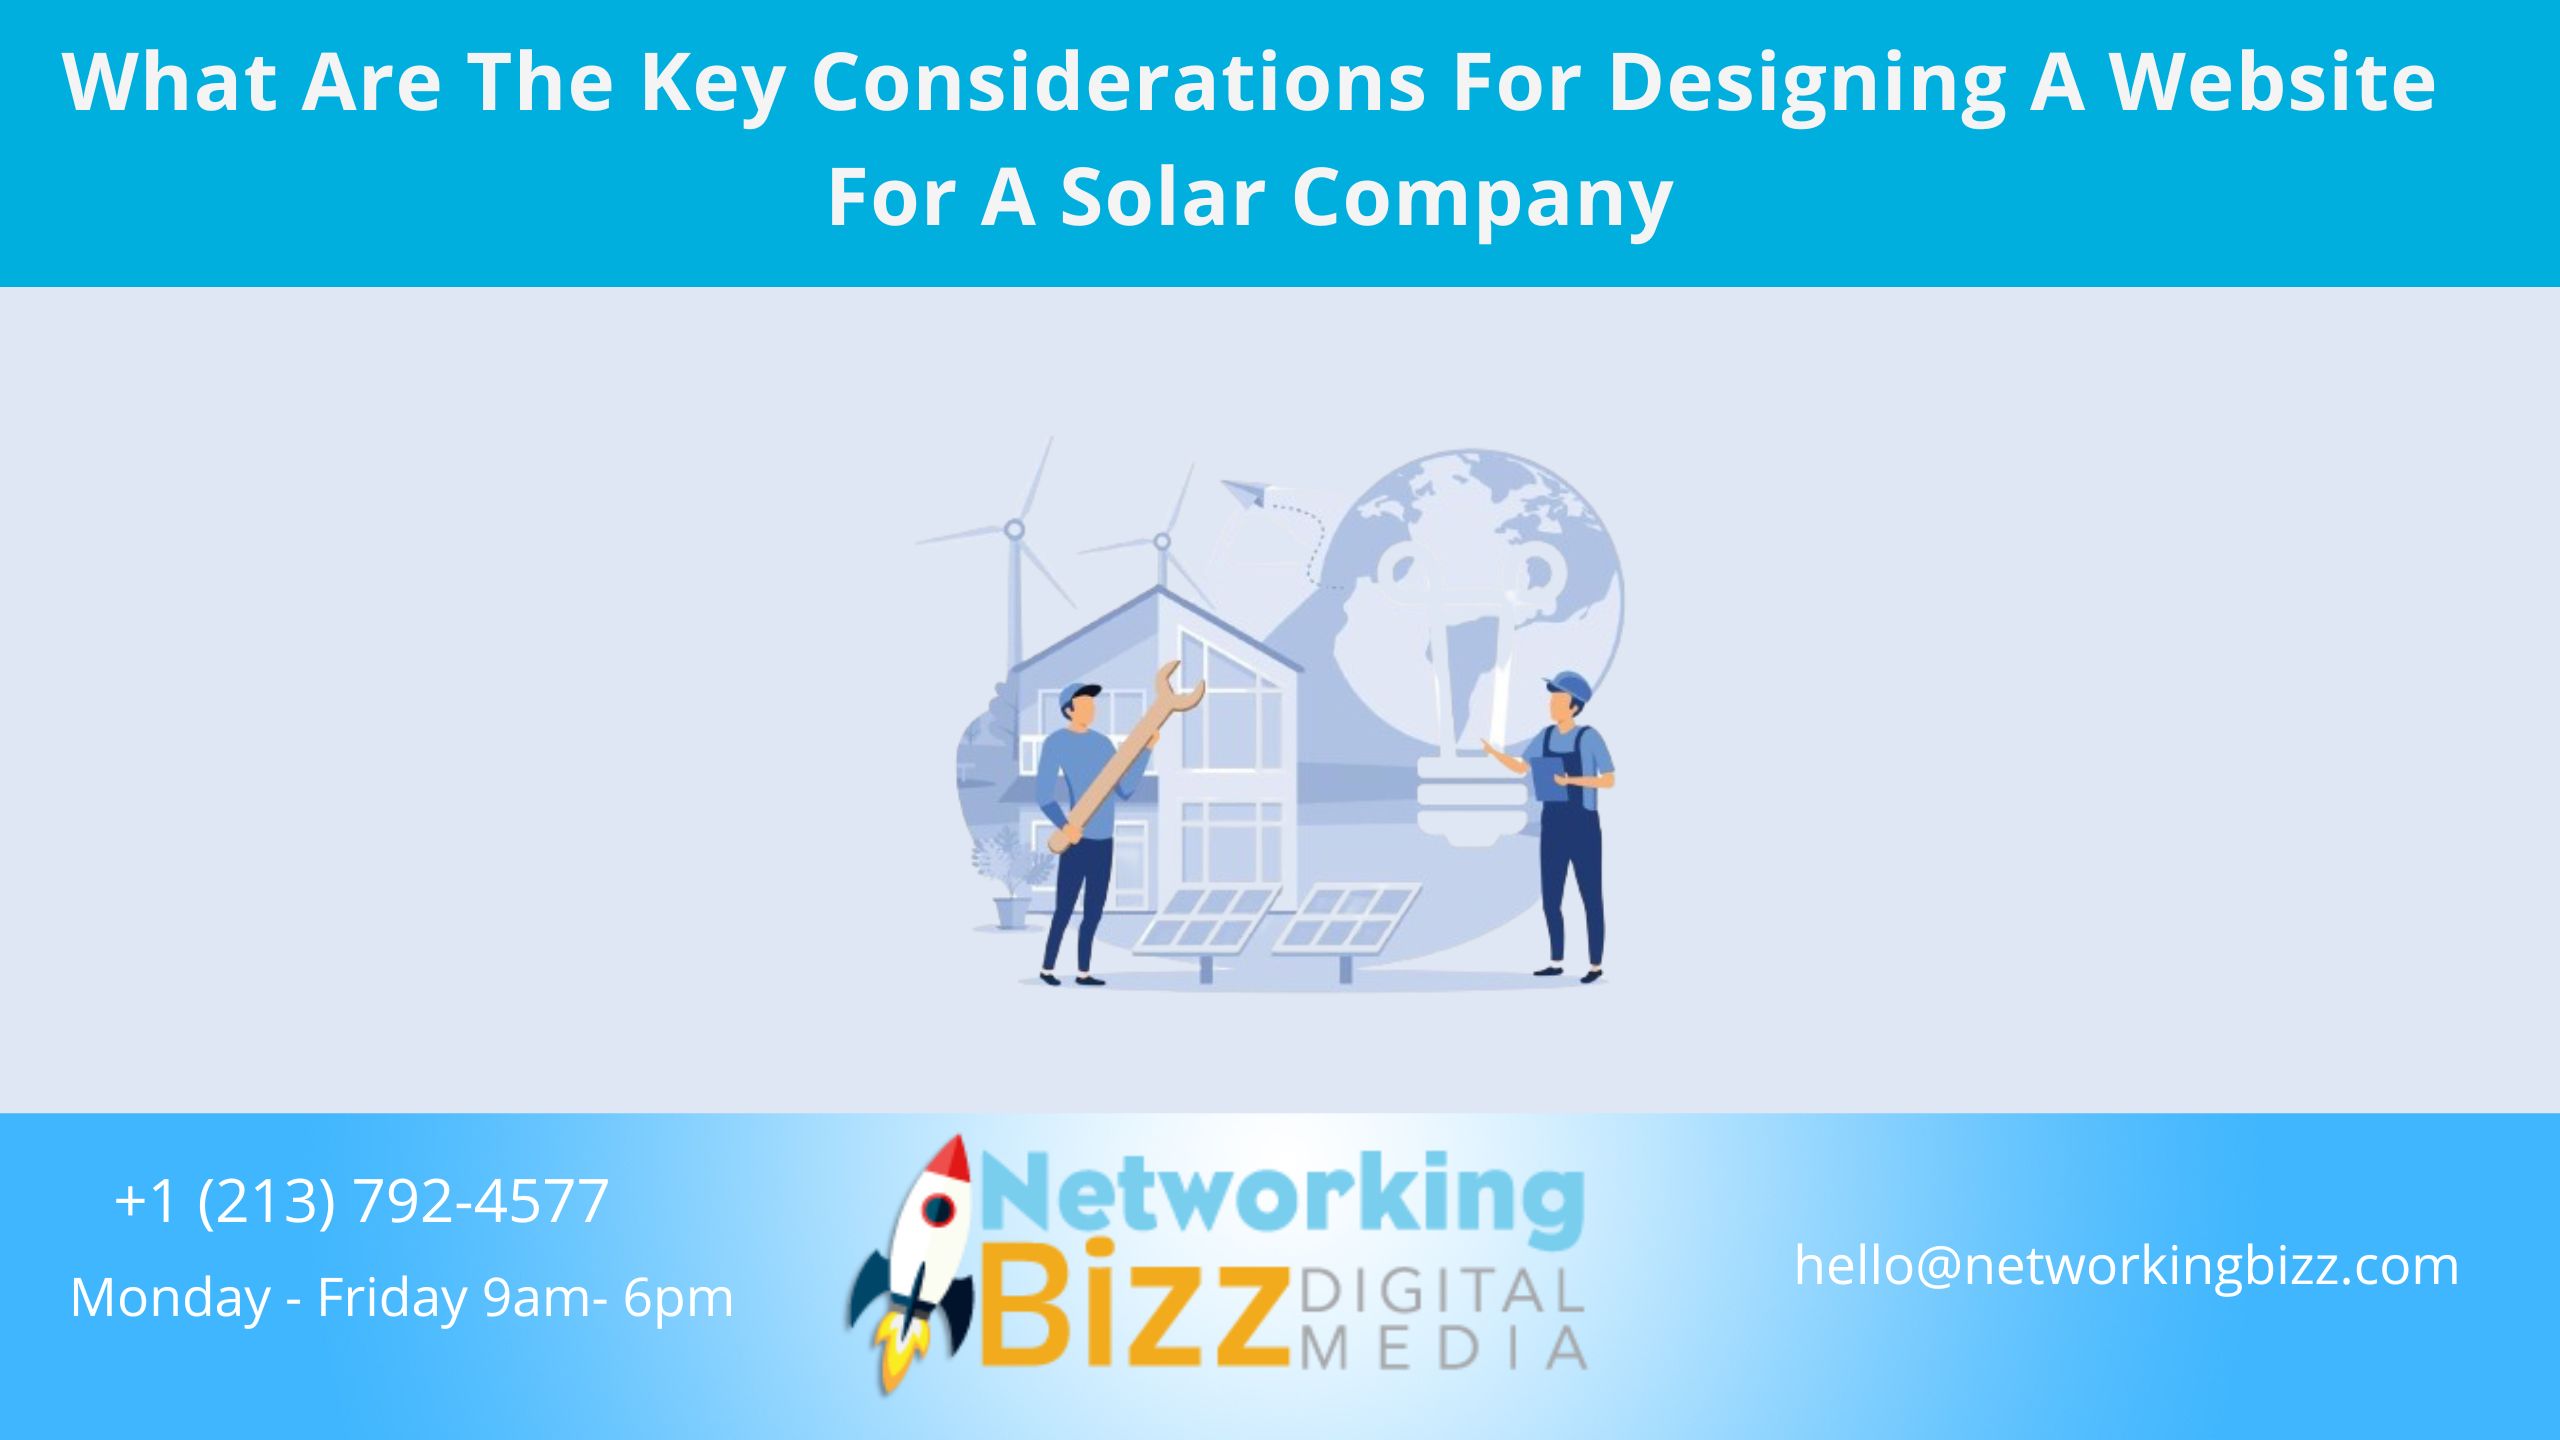 What Are The Key Considerations For Designing A Website For A Solar Company